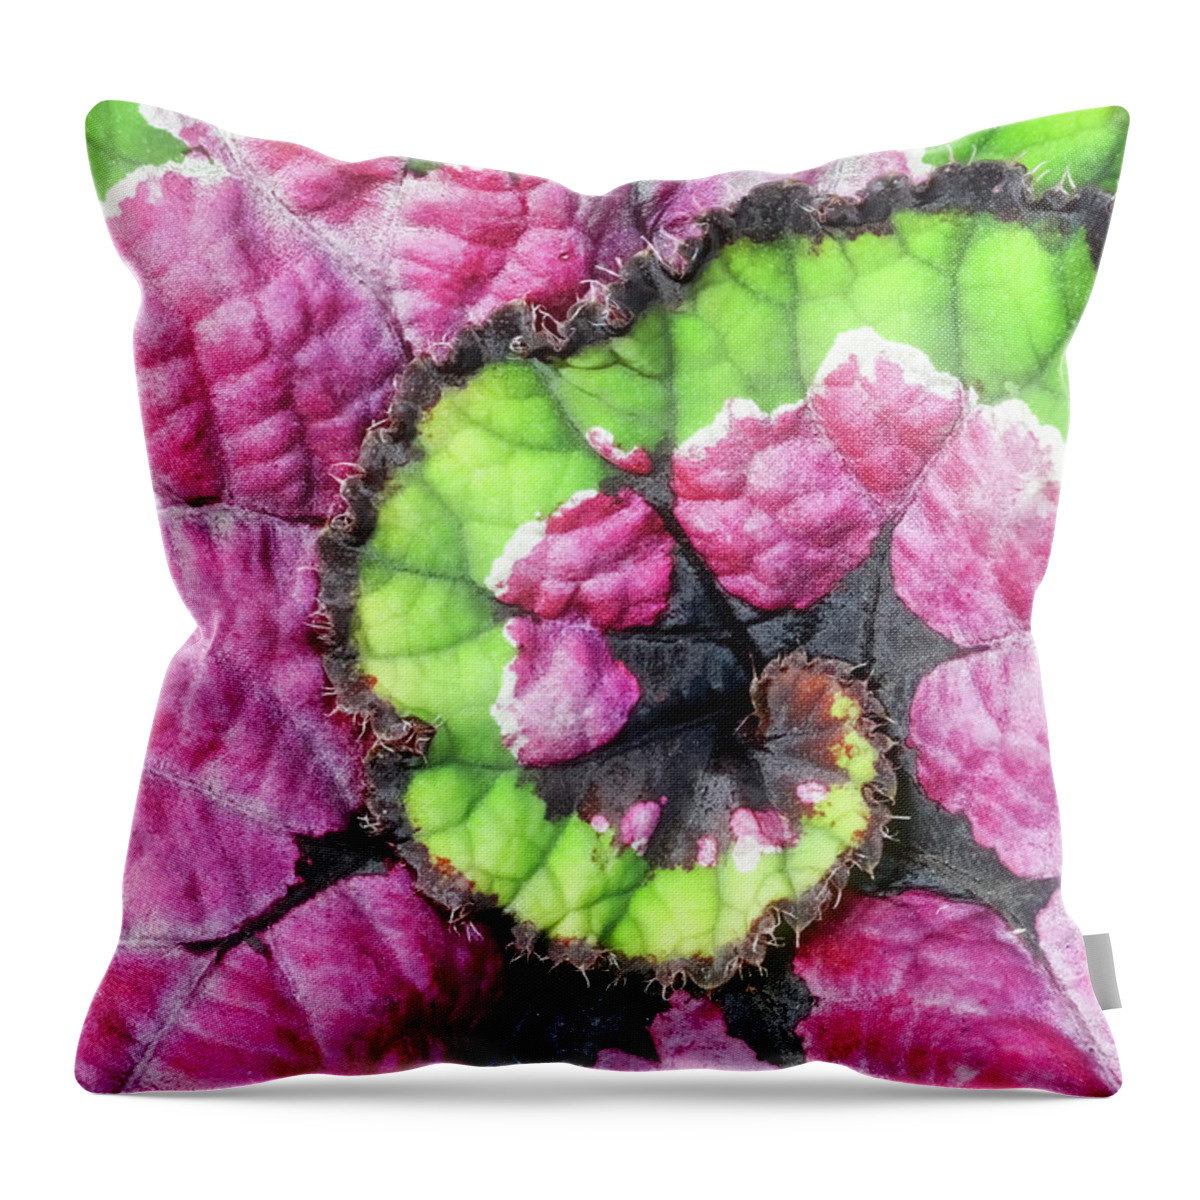 Begonia Throw Pillow featuring the photograph Nautilus Leaf Begonia by Gary Slawsky